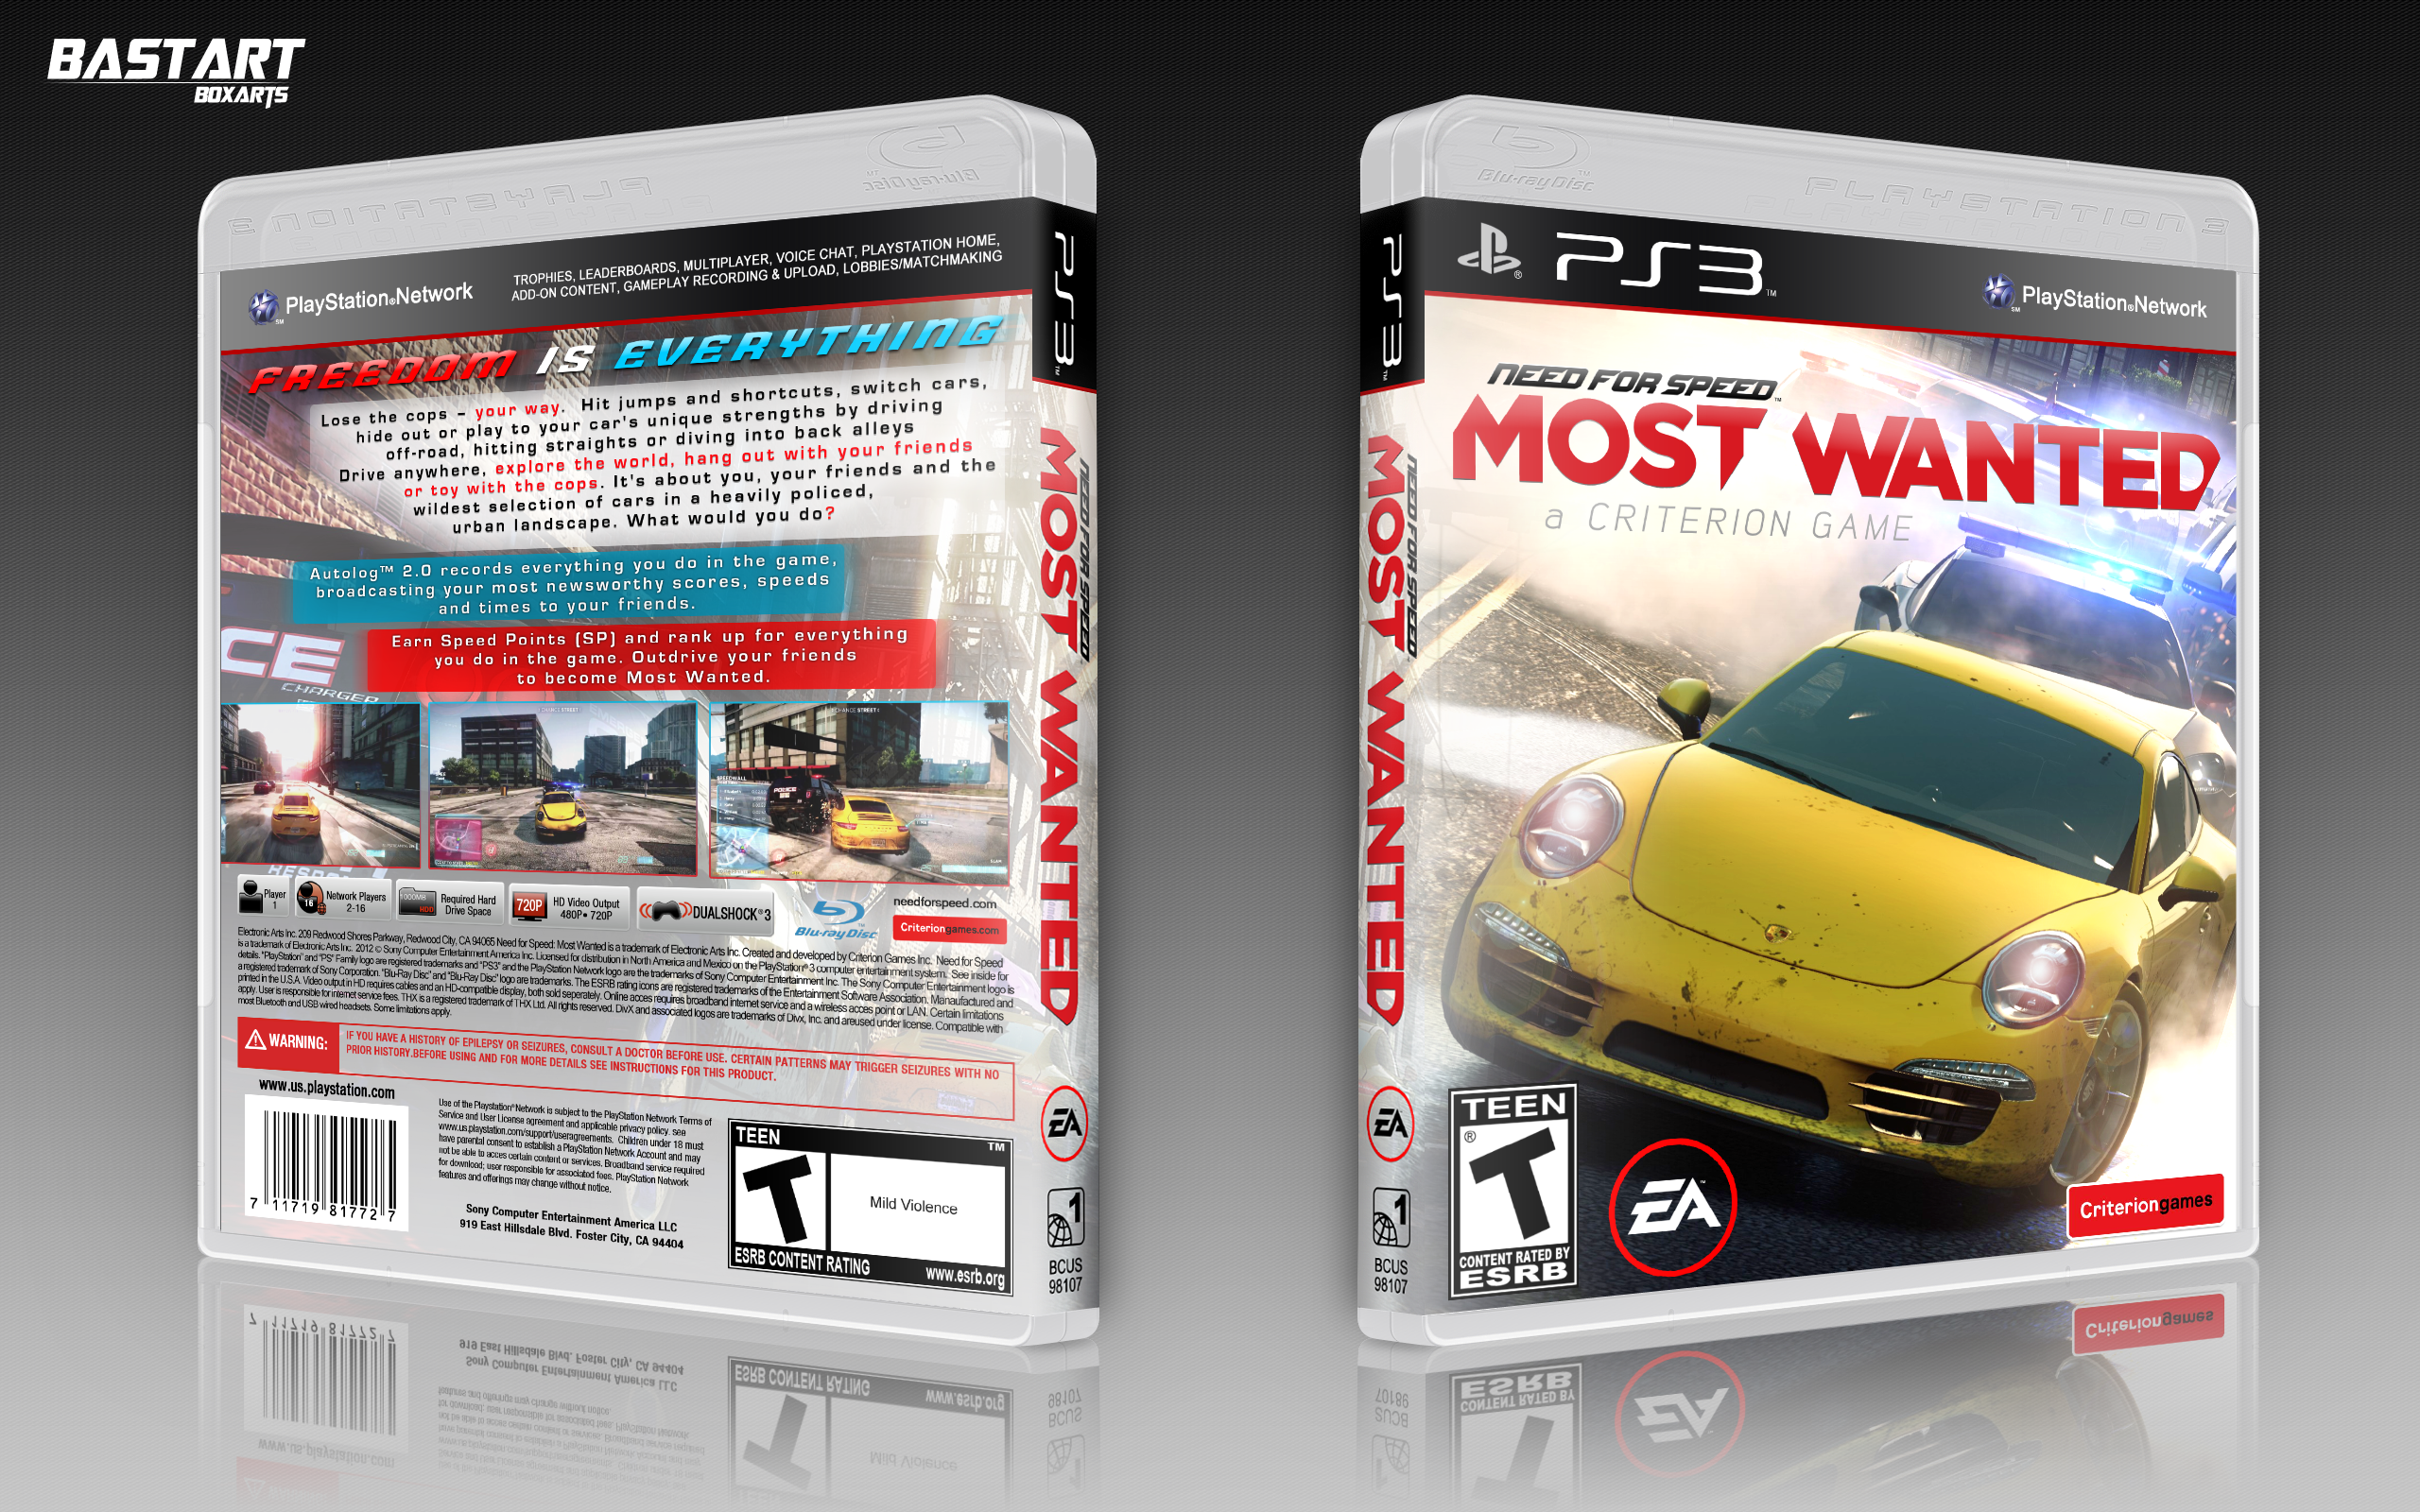 Need For Speed: Most Wanted box cover